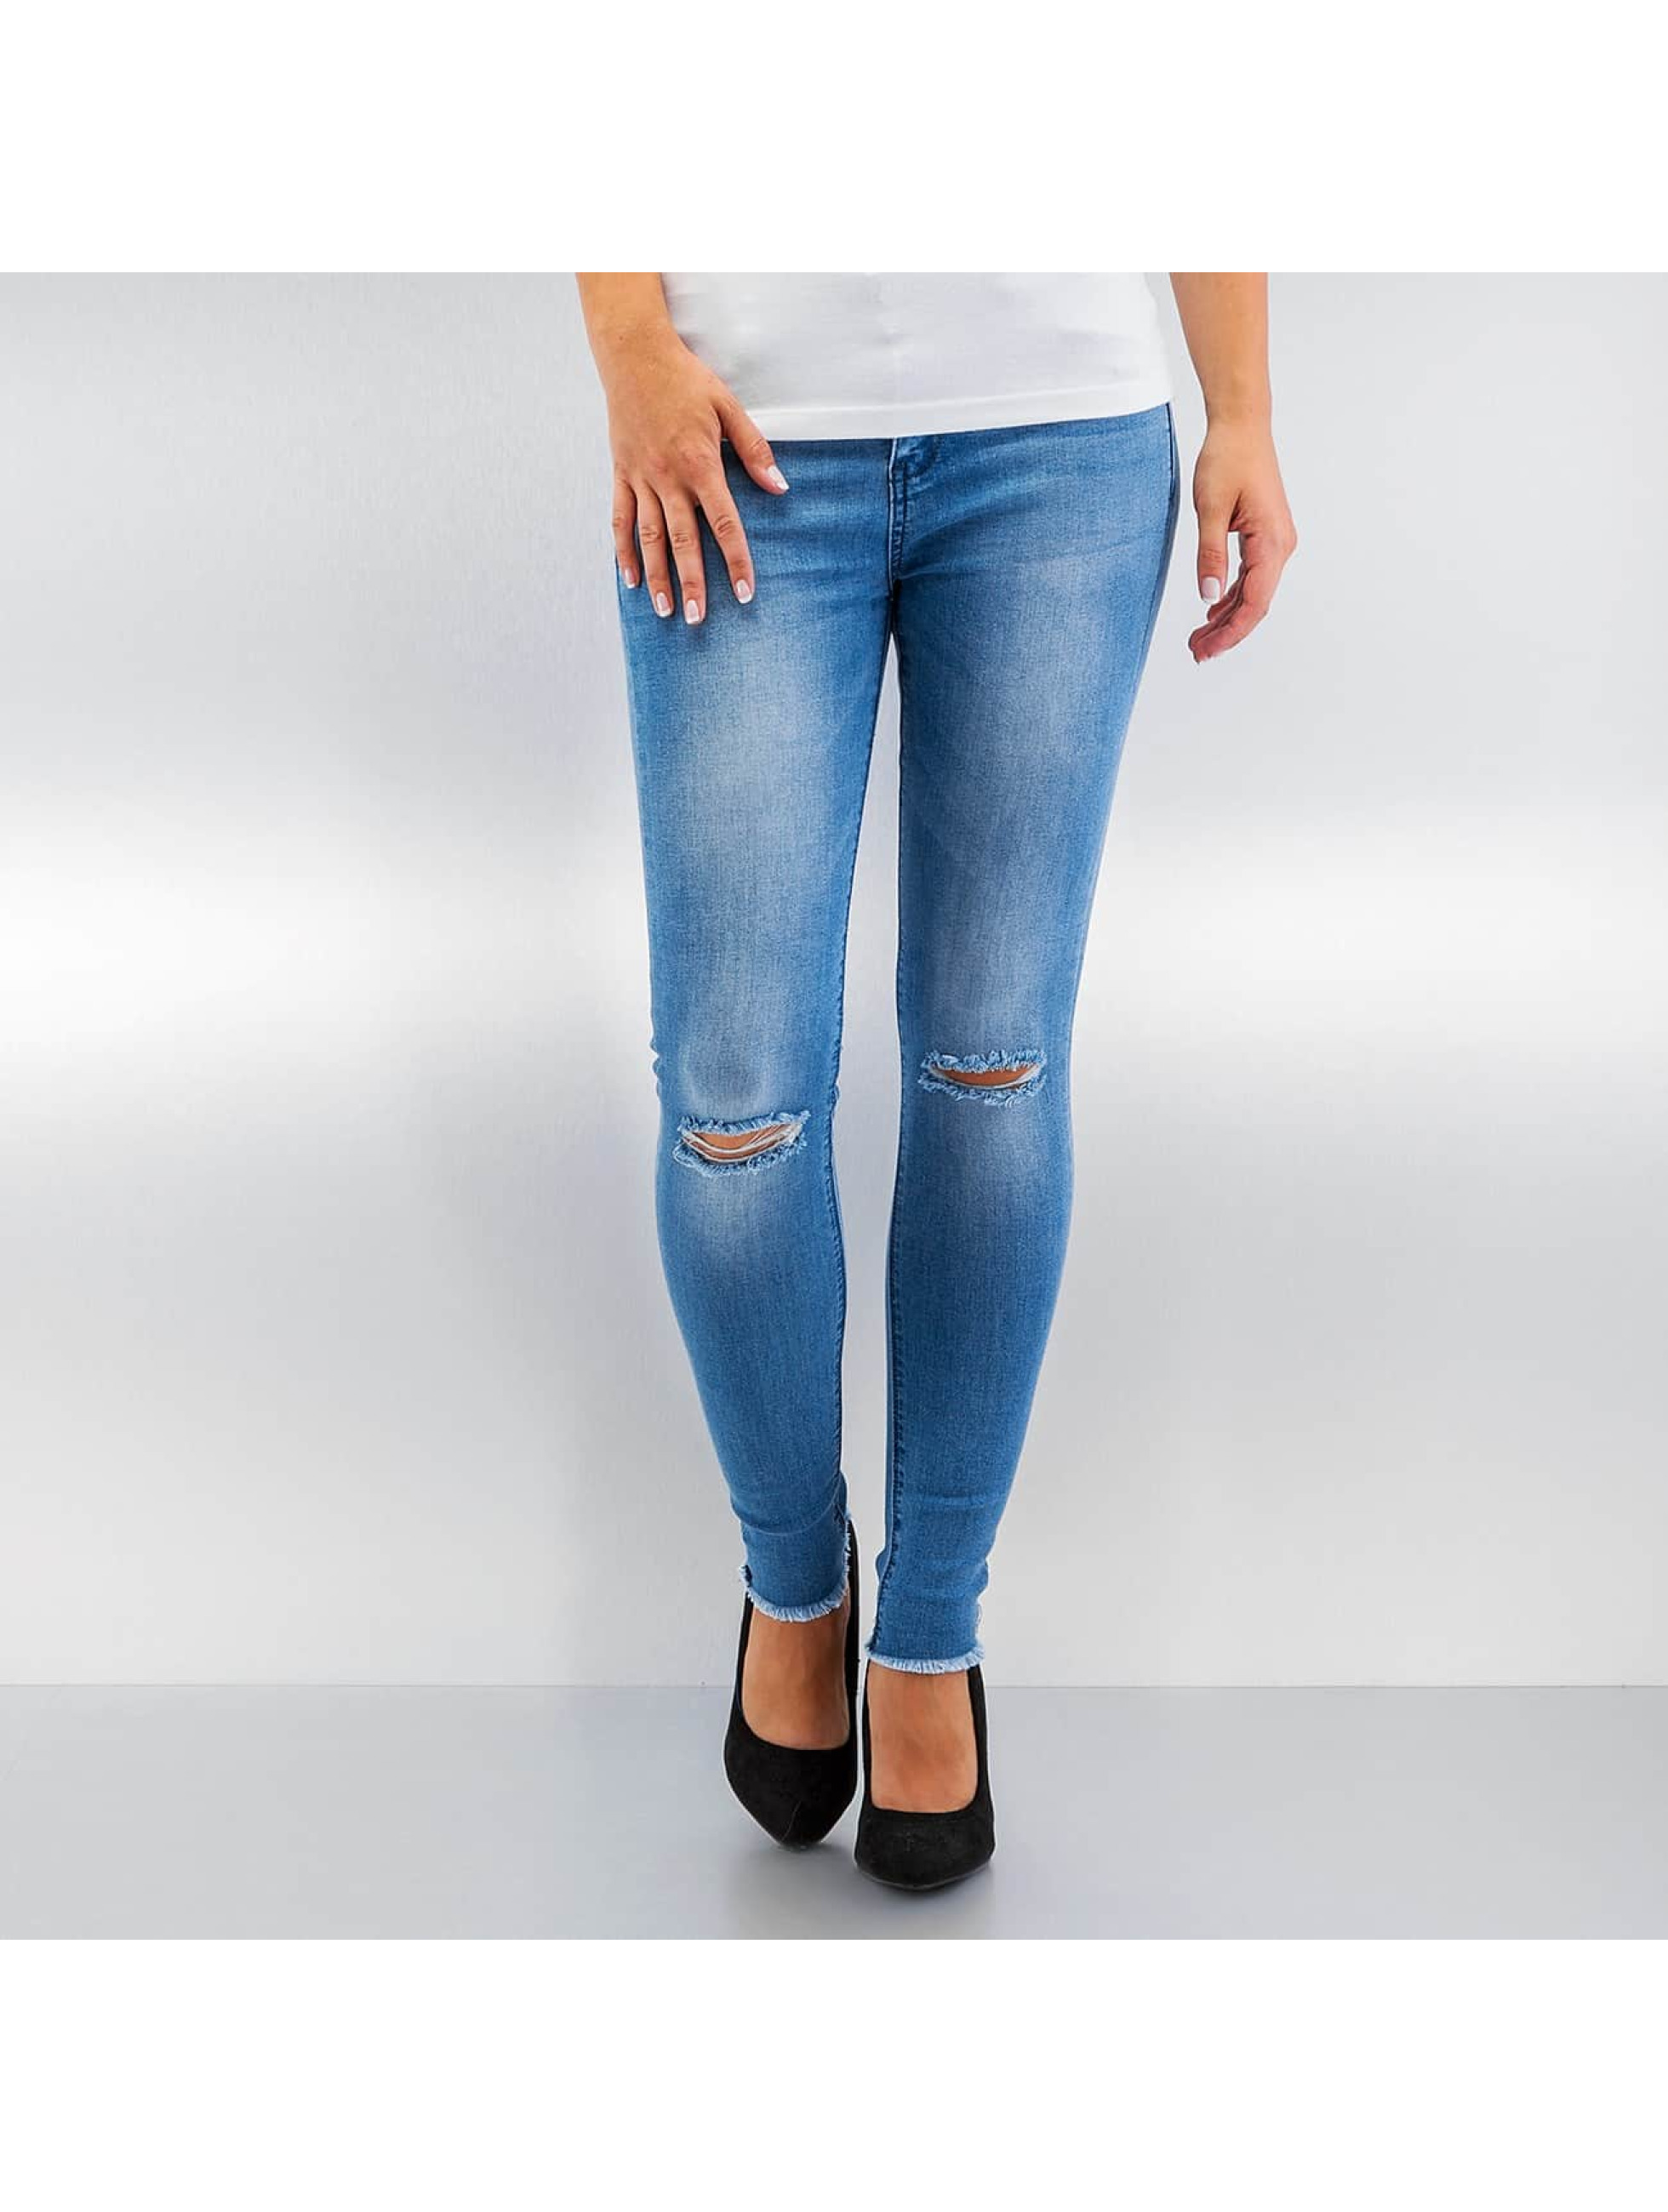 Hailys Jeans / Skinny jeans Ina in blauw